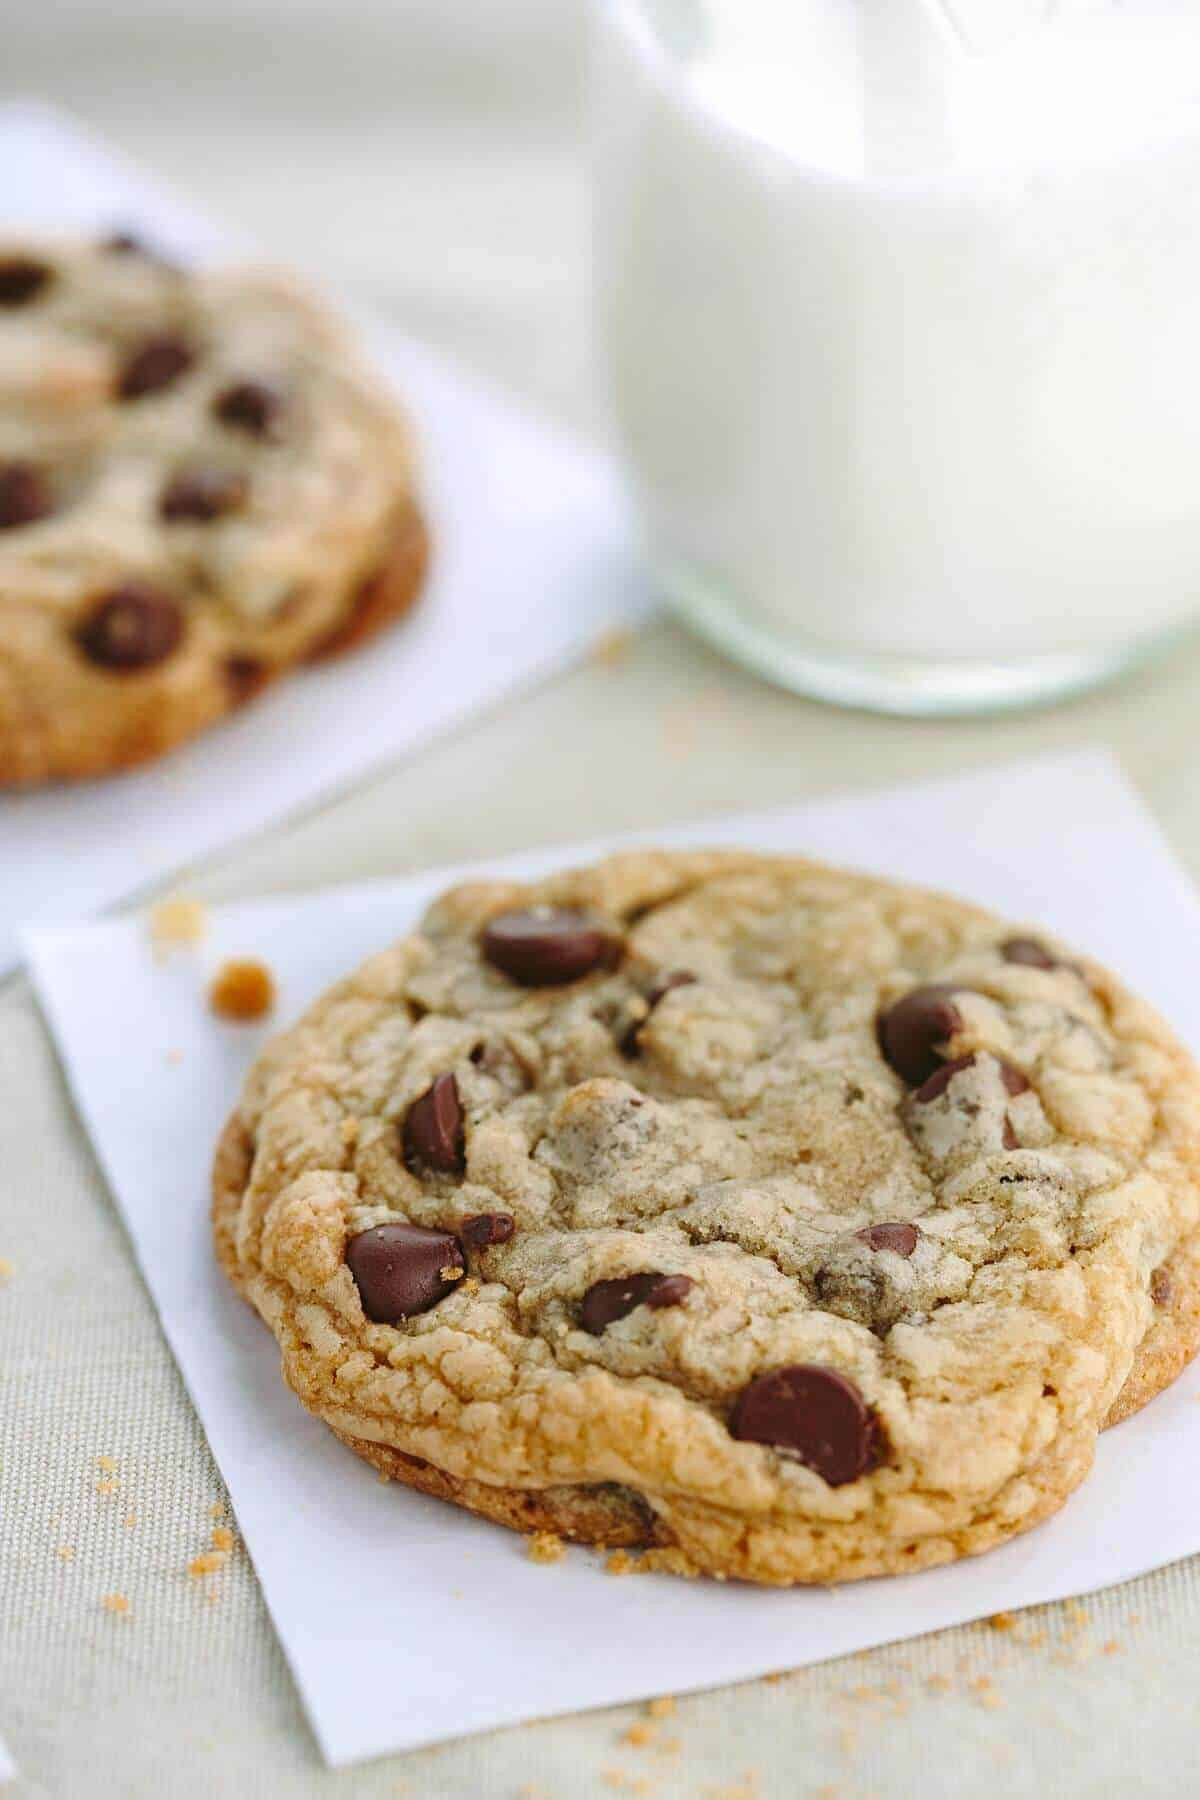 Chewy Chocolate Cookies Recipes
 The Best Chewy Chocolate Chip Cookies Recipe